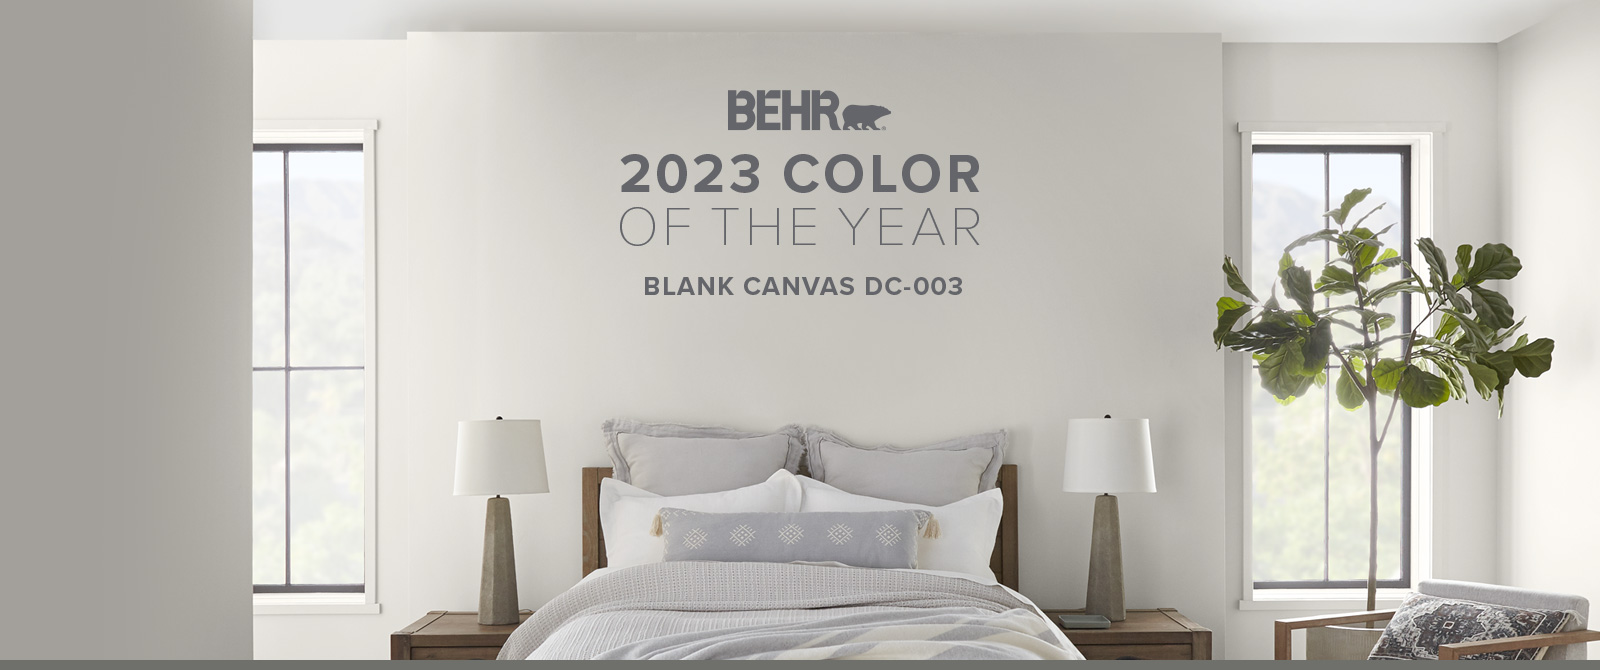  INTRODUCING  BEHR COLOR OF THE YEAR